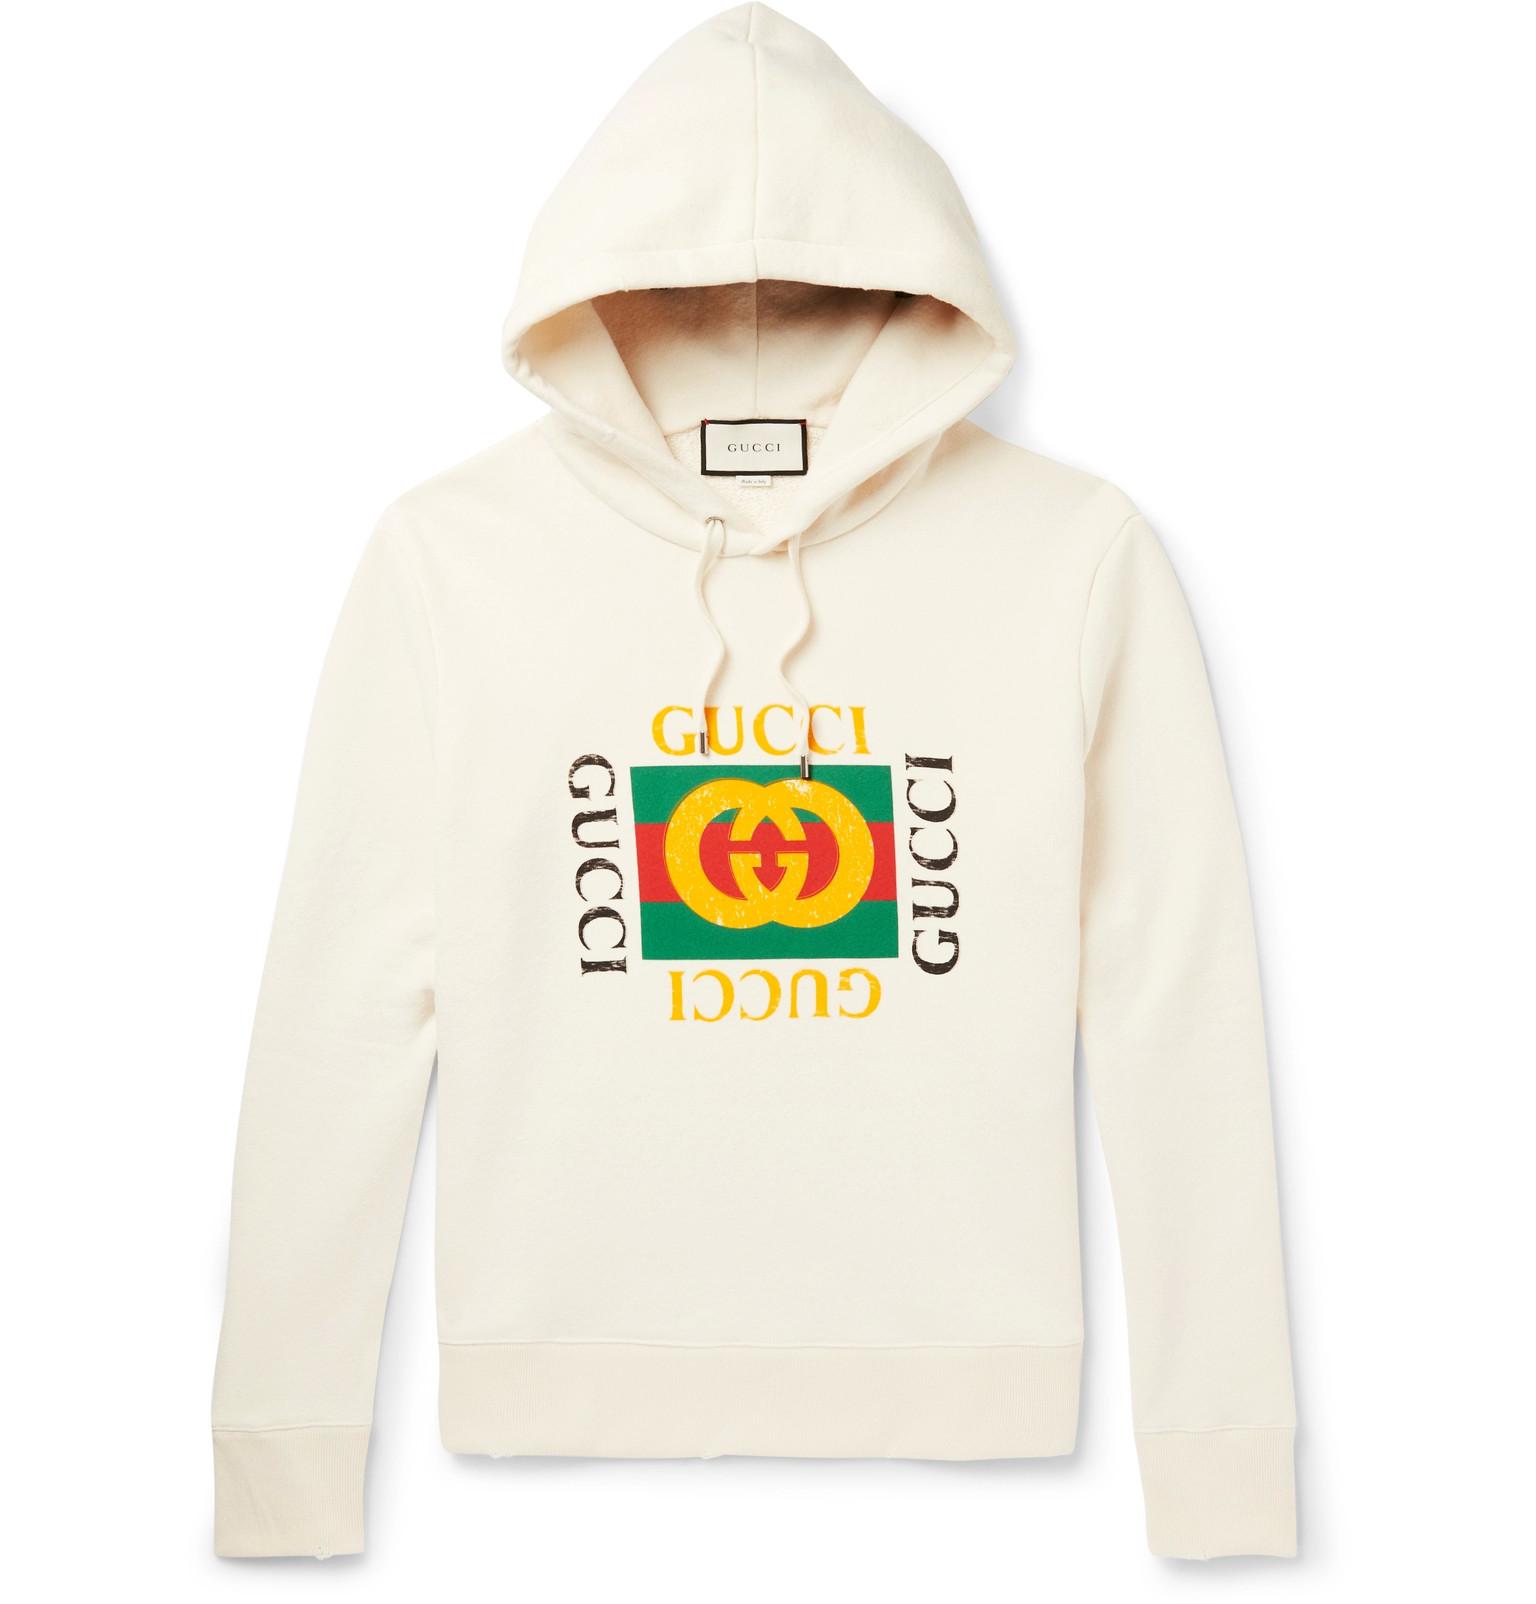 Lyst - Gucci Ghost Hooded Sweatshirt in White for Men